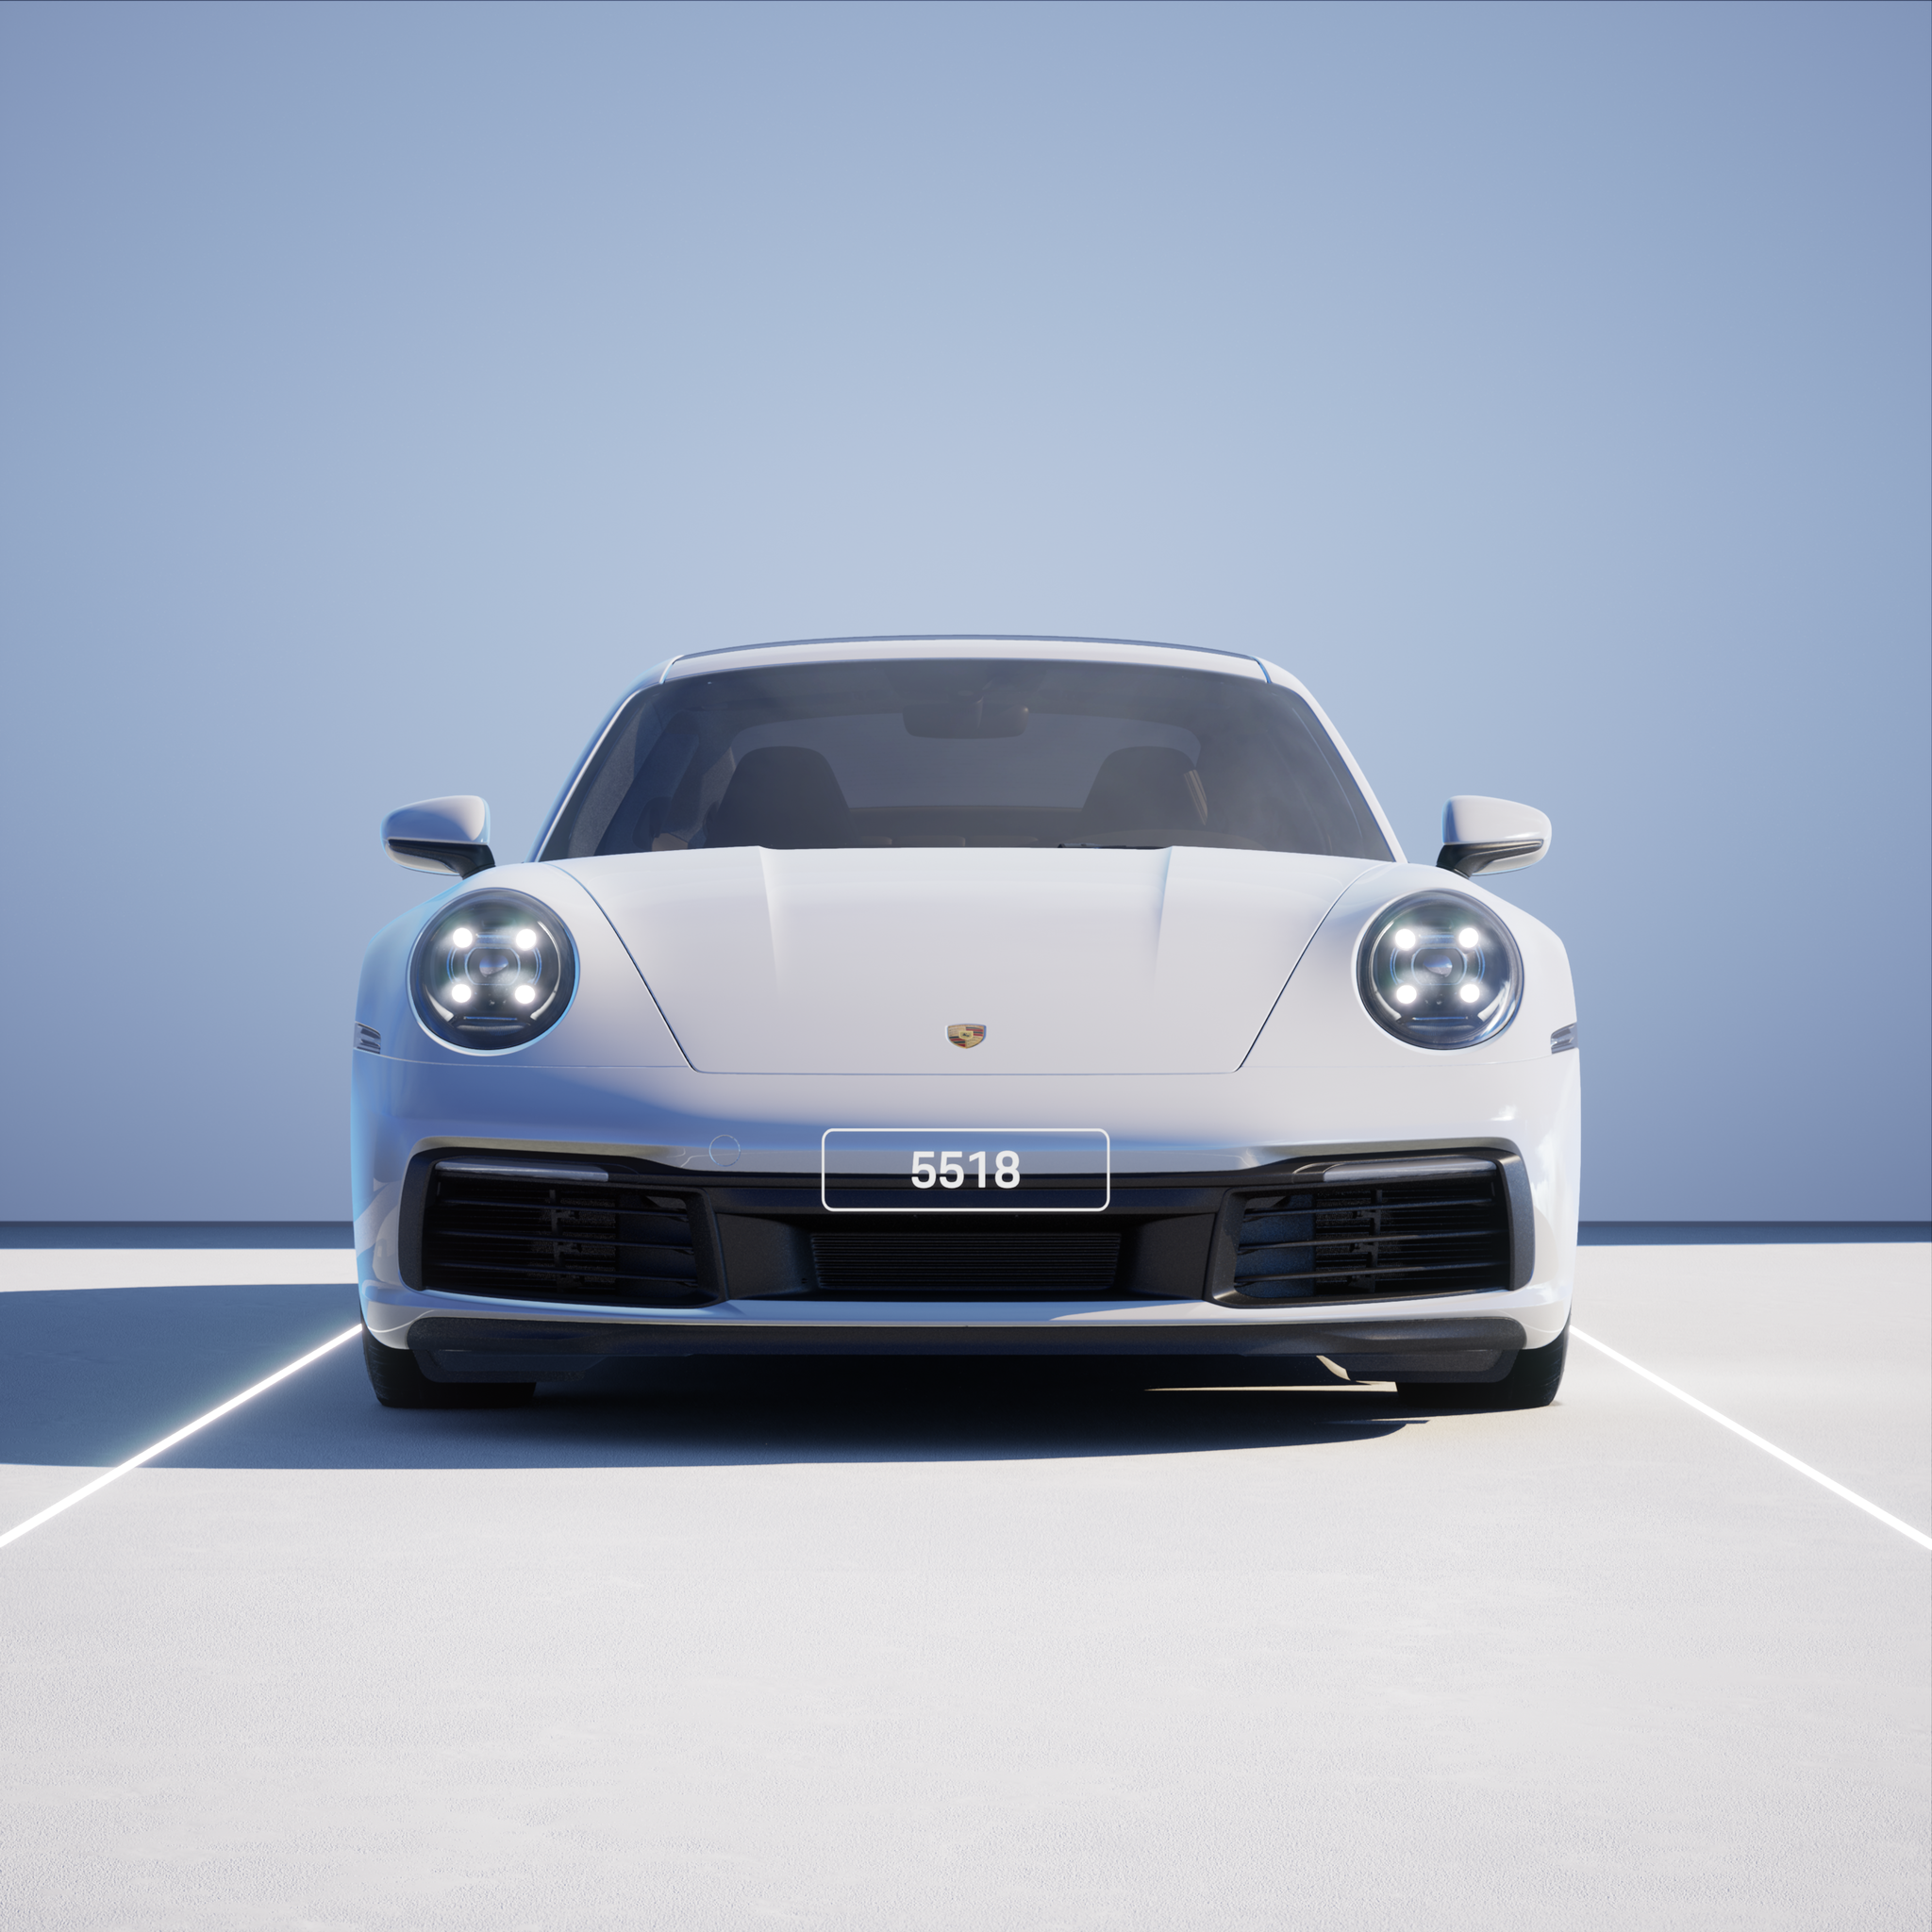 The PORSCHΞ 911 5518 image in phase